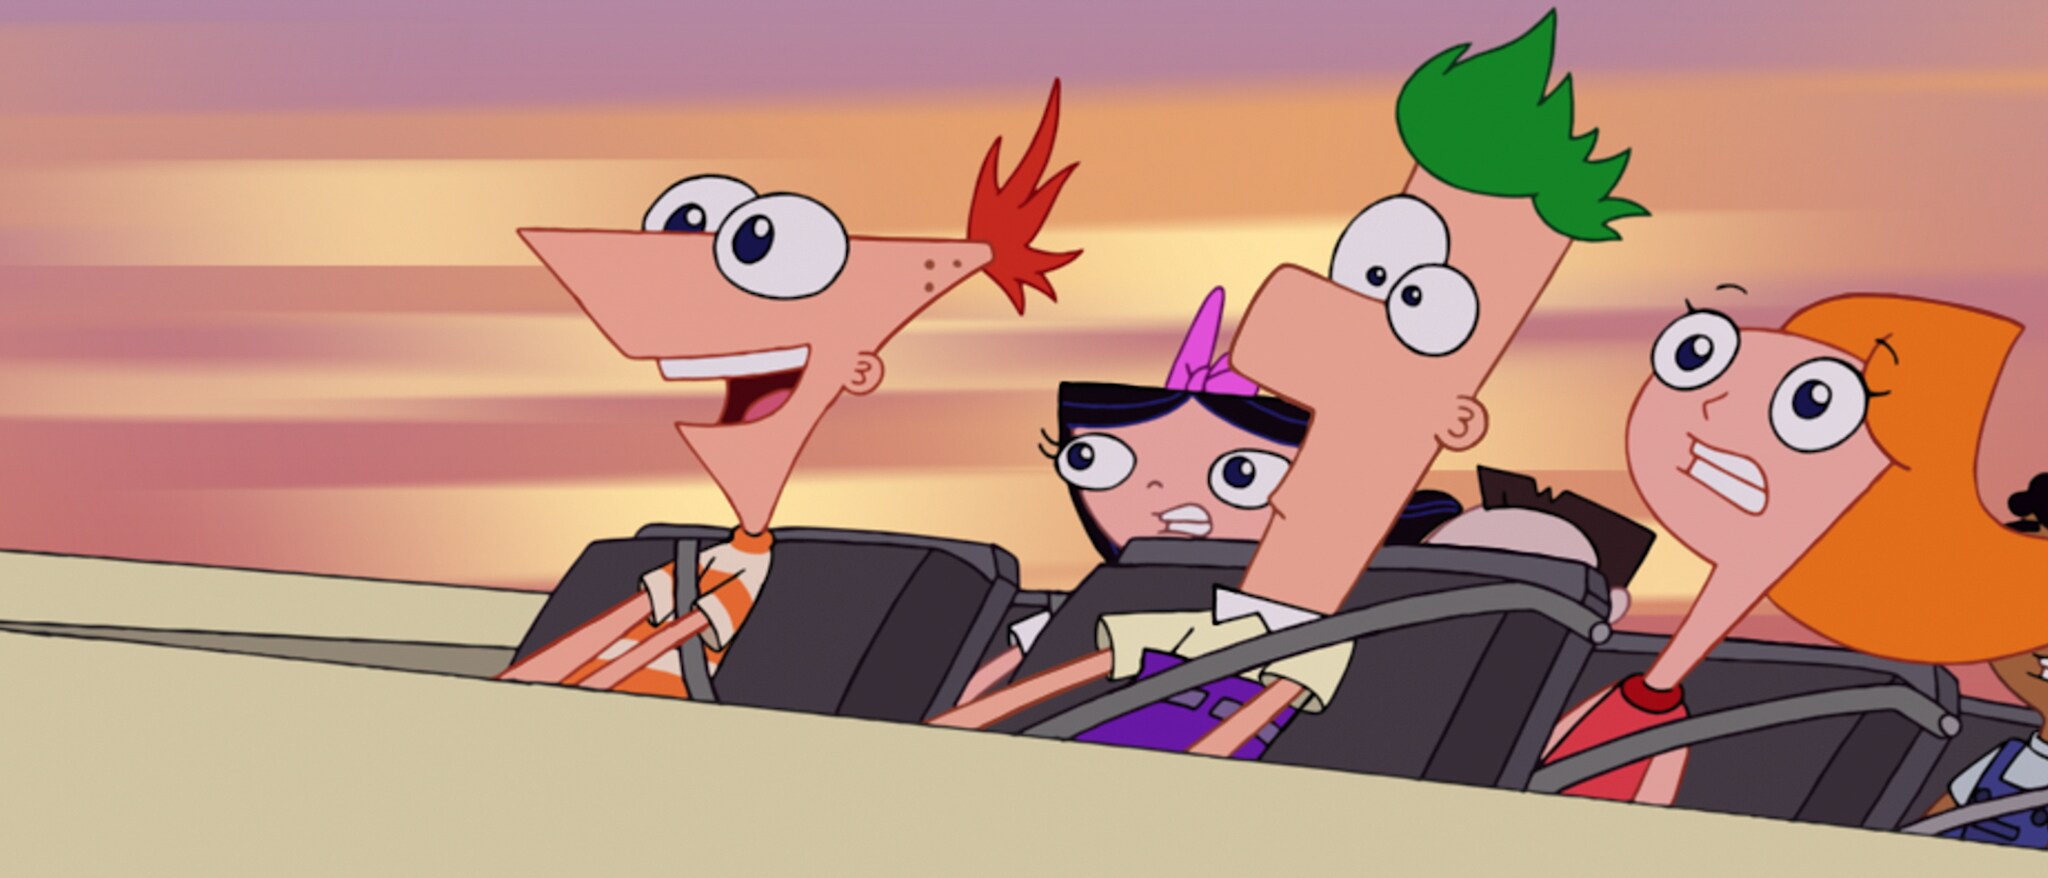 phineas and ferb theme artist